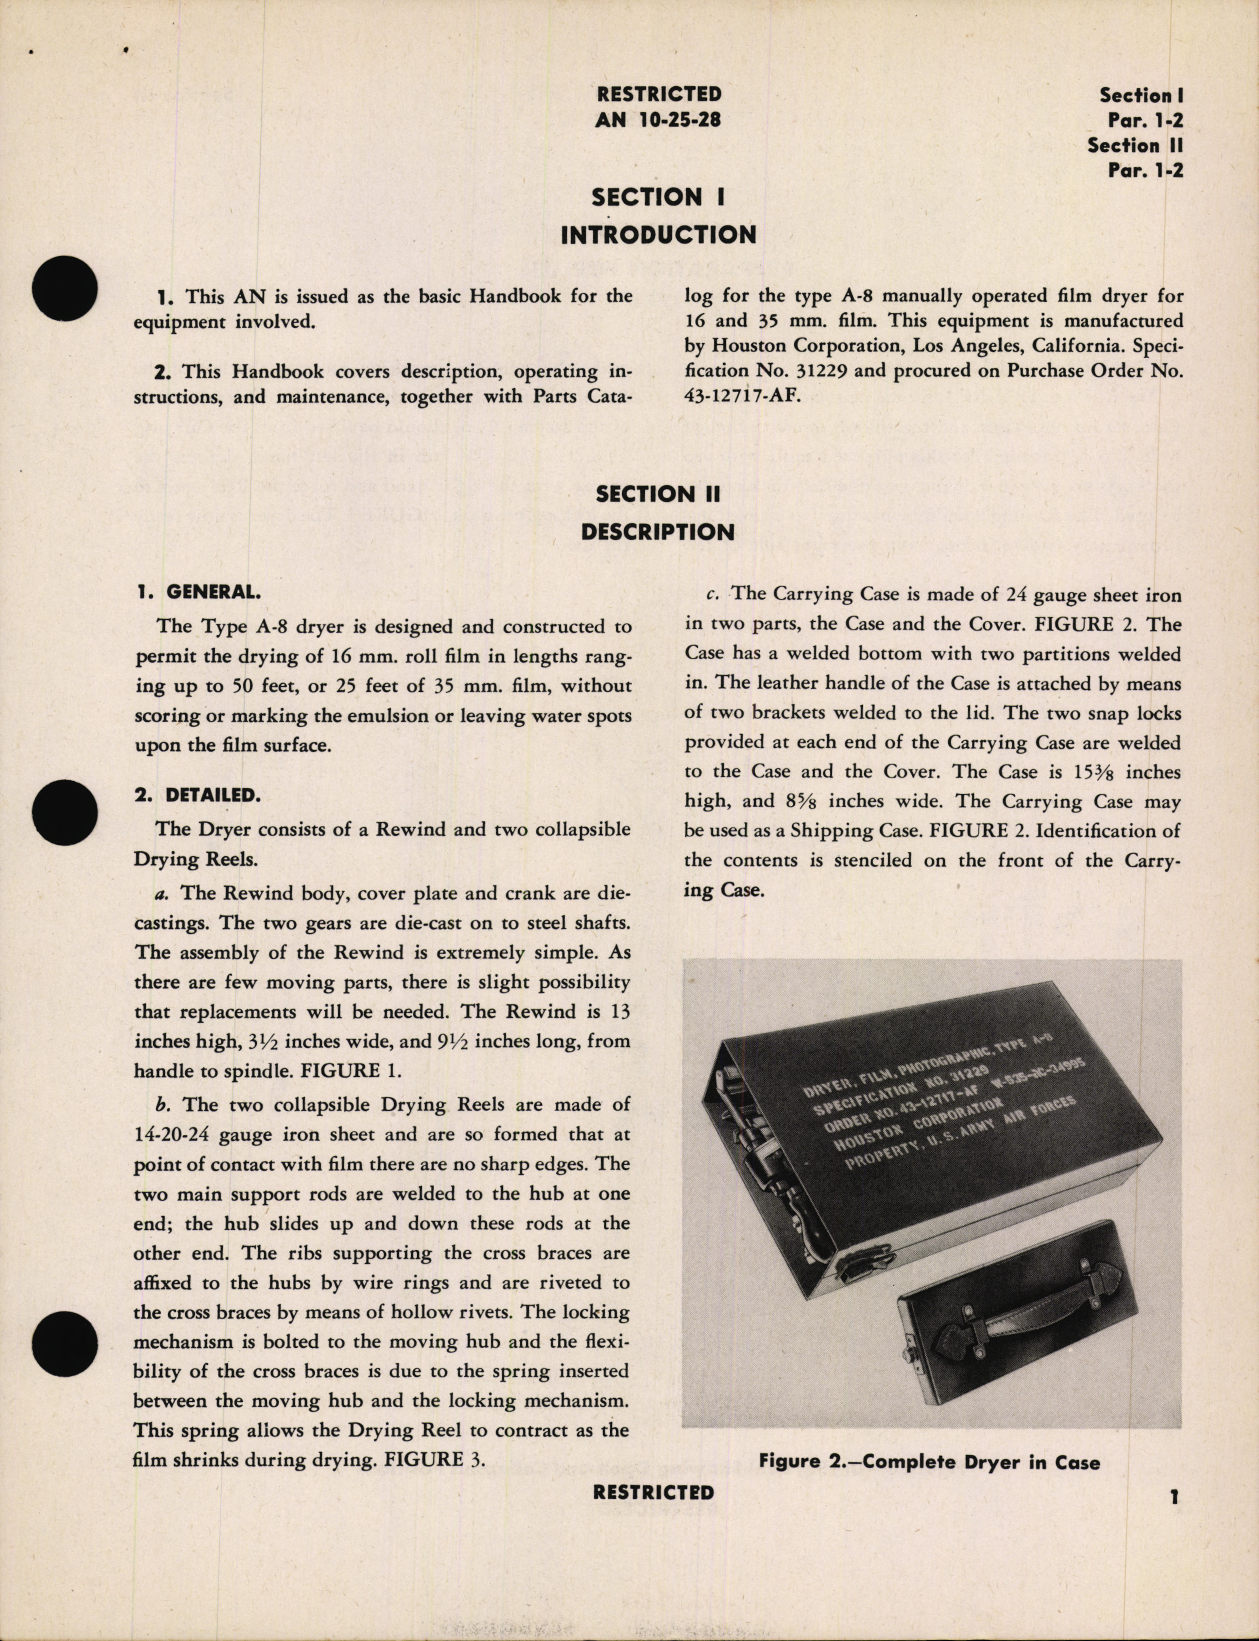 Sample page 7 from AirCorps Library document: Handbook of Operation and Service Instructions with Parts Catalog for Type A-8 Photographic Film Dryer